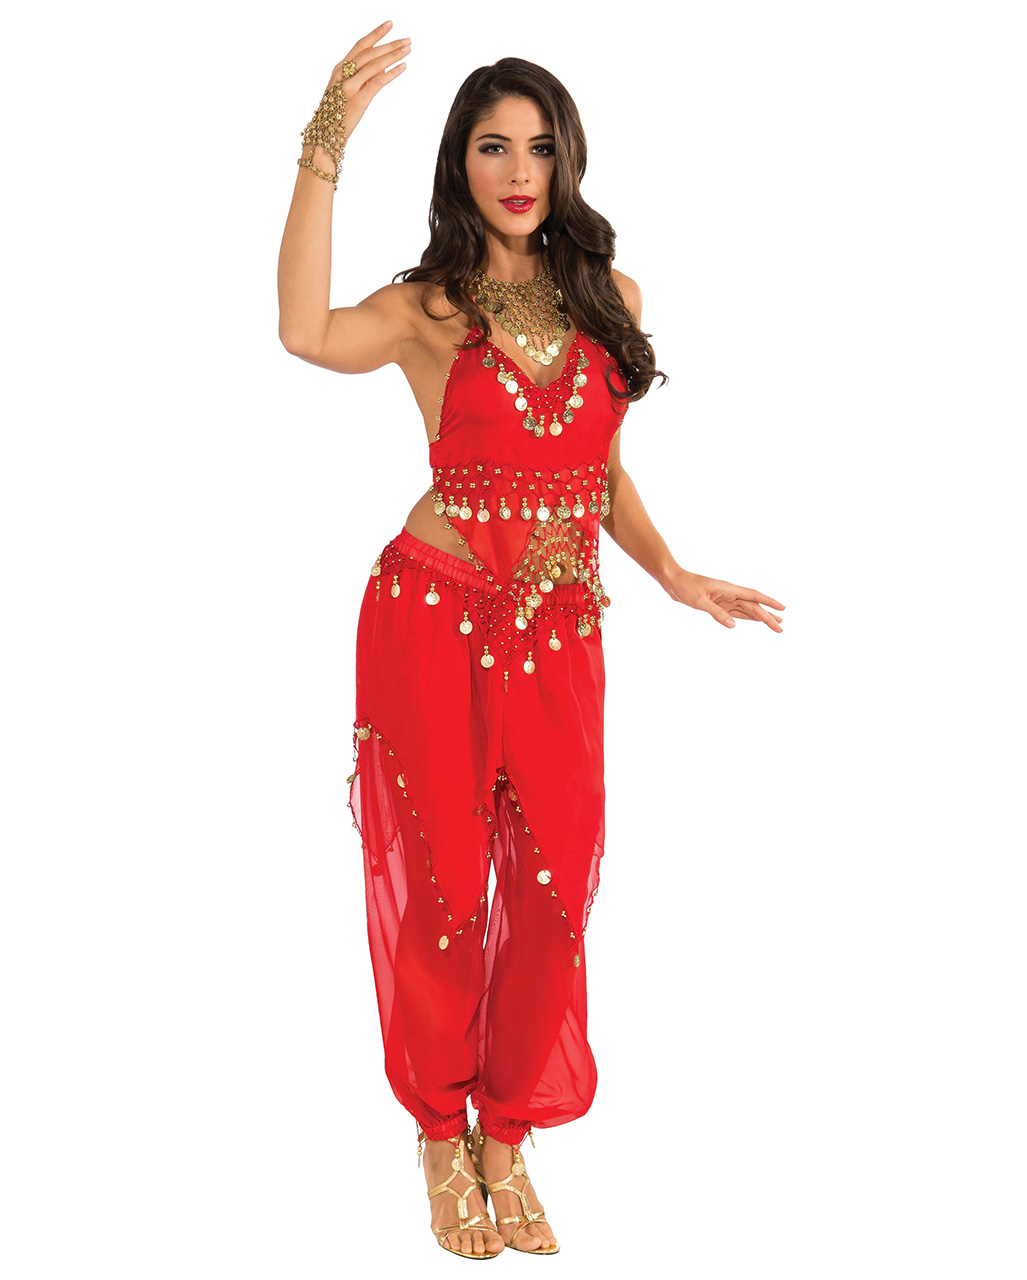 Belly Dance Costume Set For Adult Ladies Includes Oriental